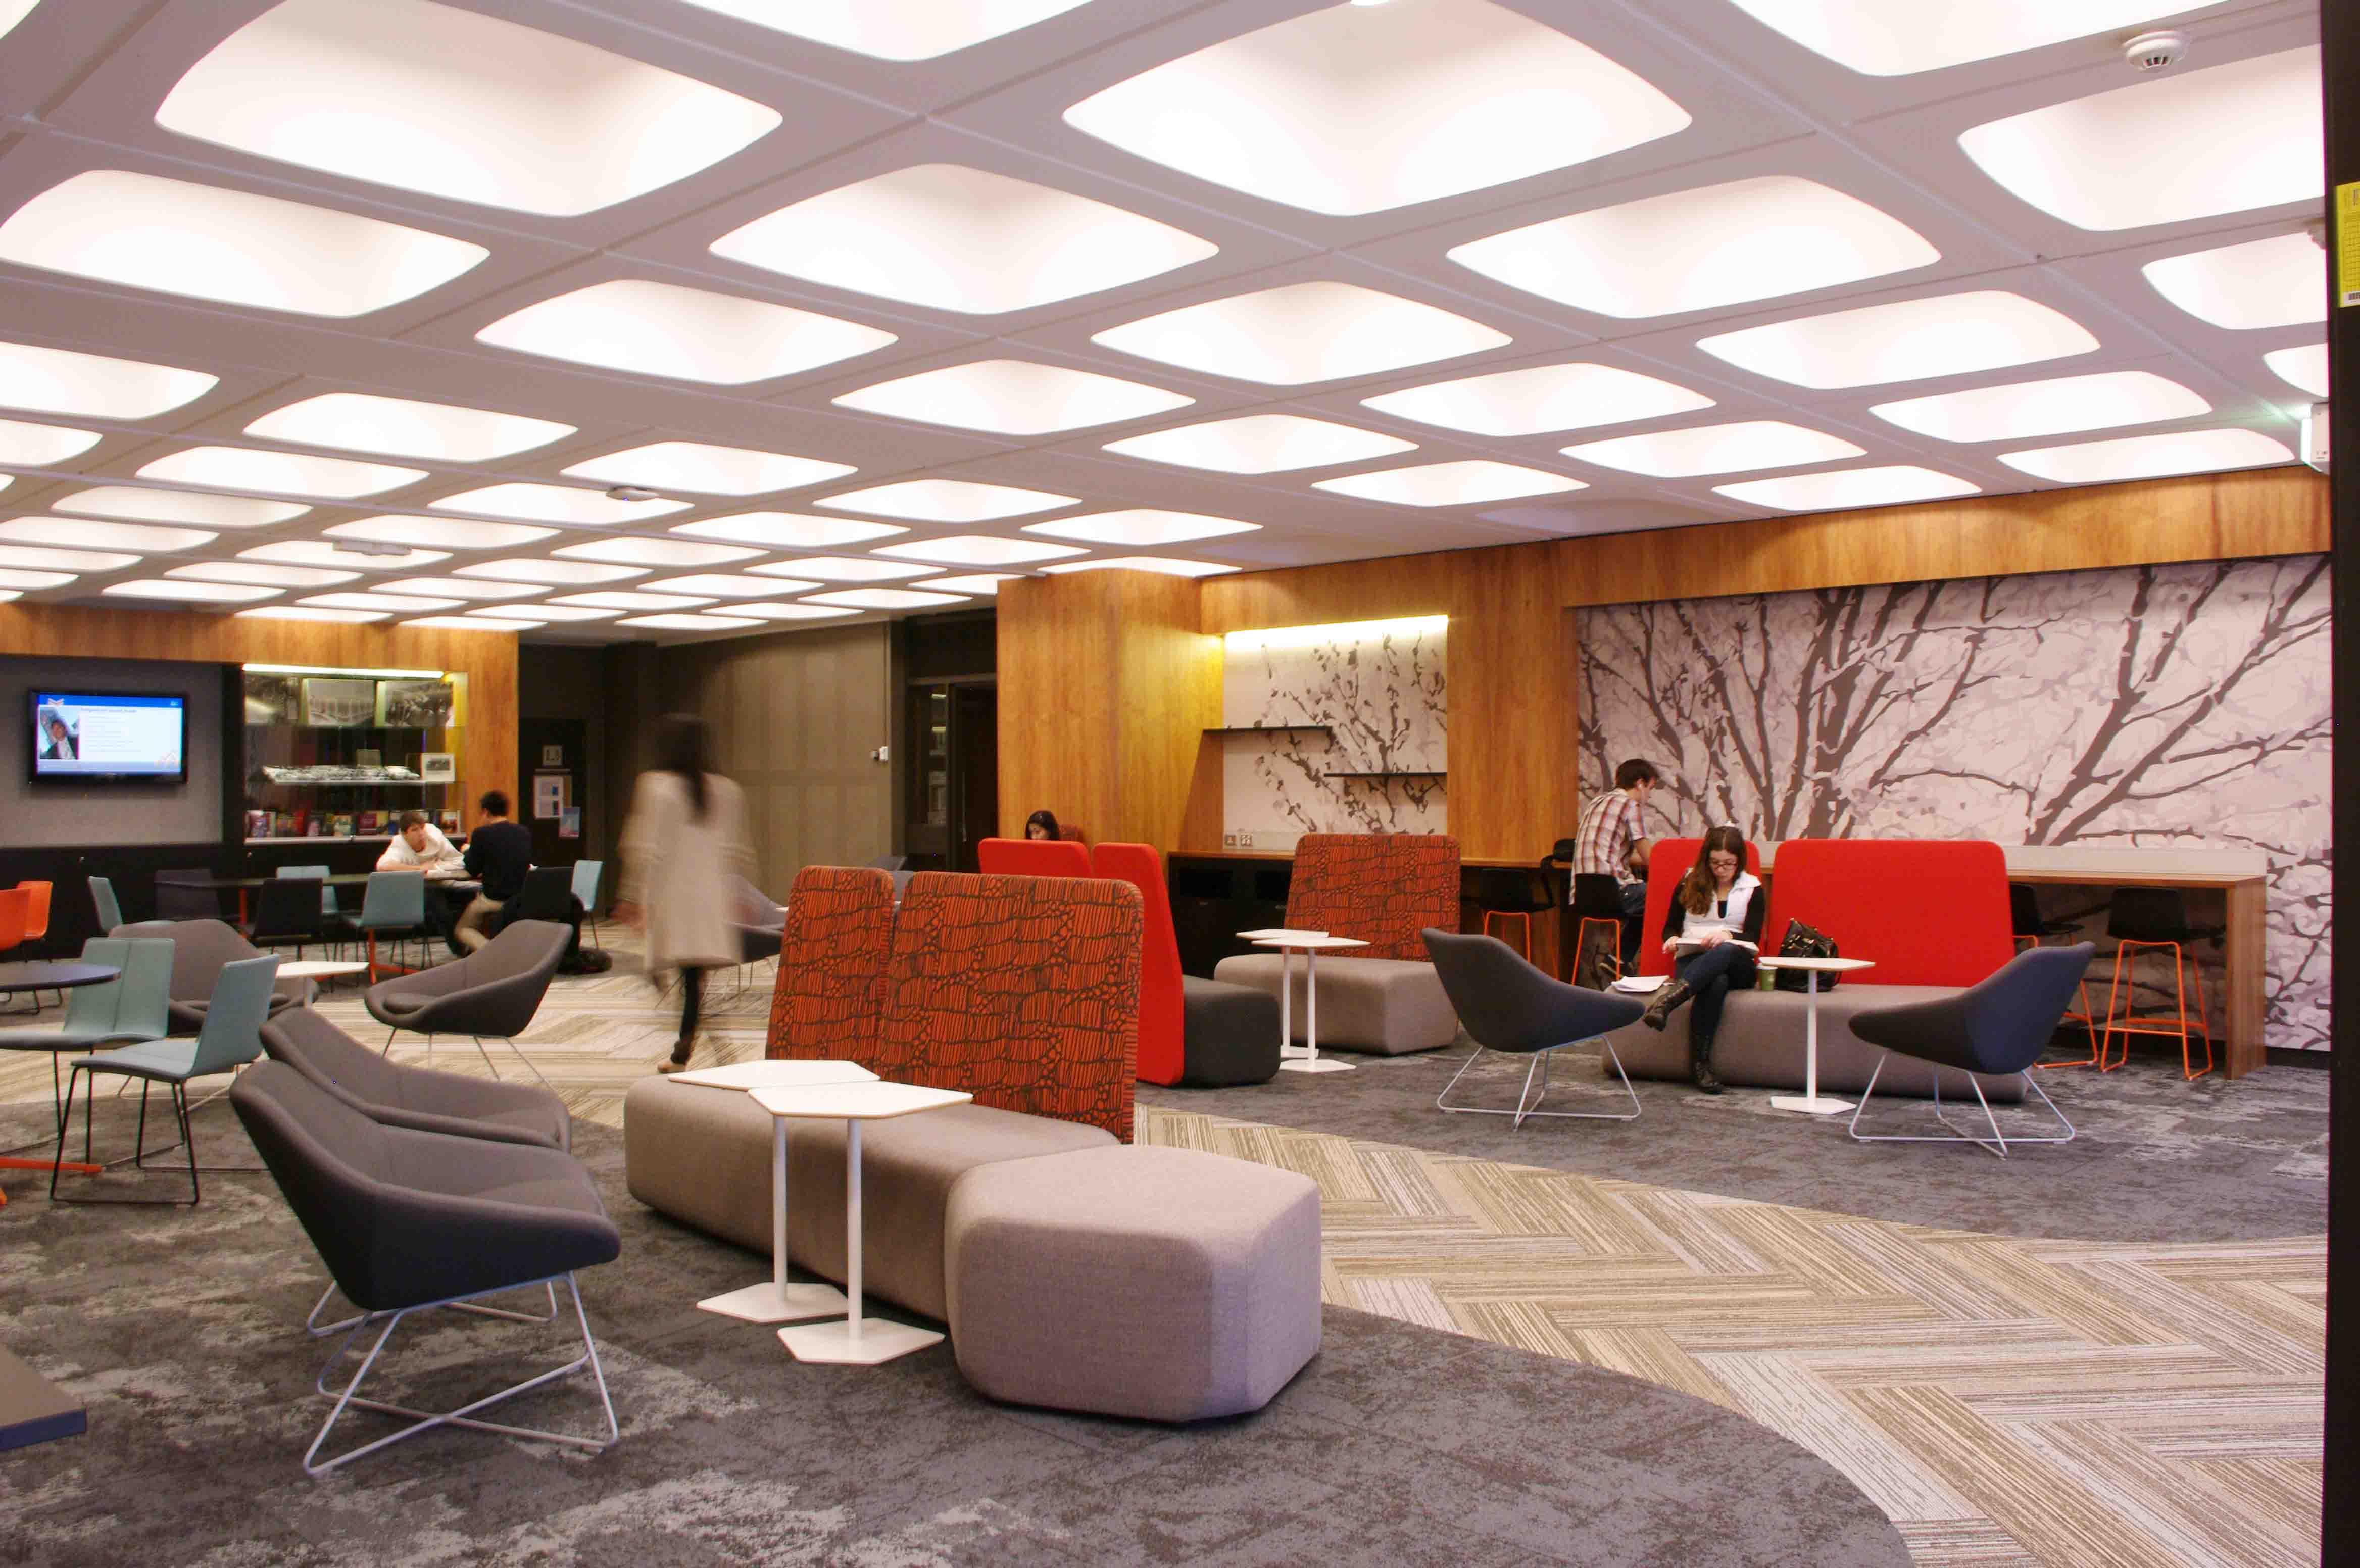 How to Choose Carpeting for Lobbies